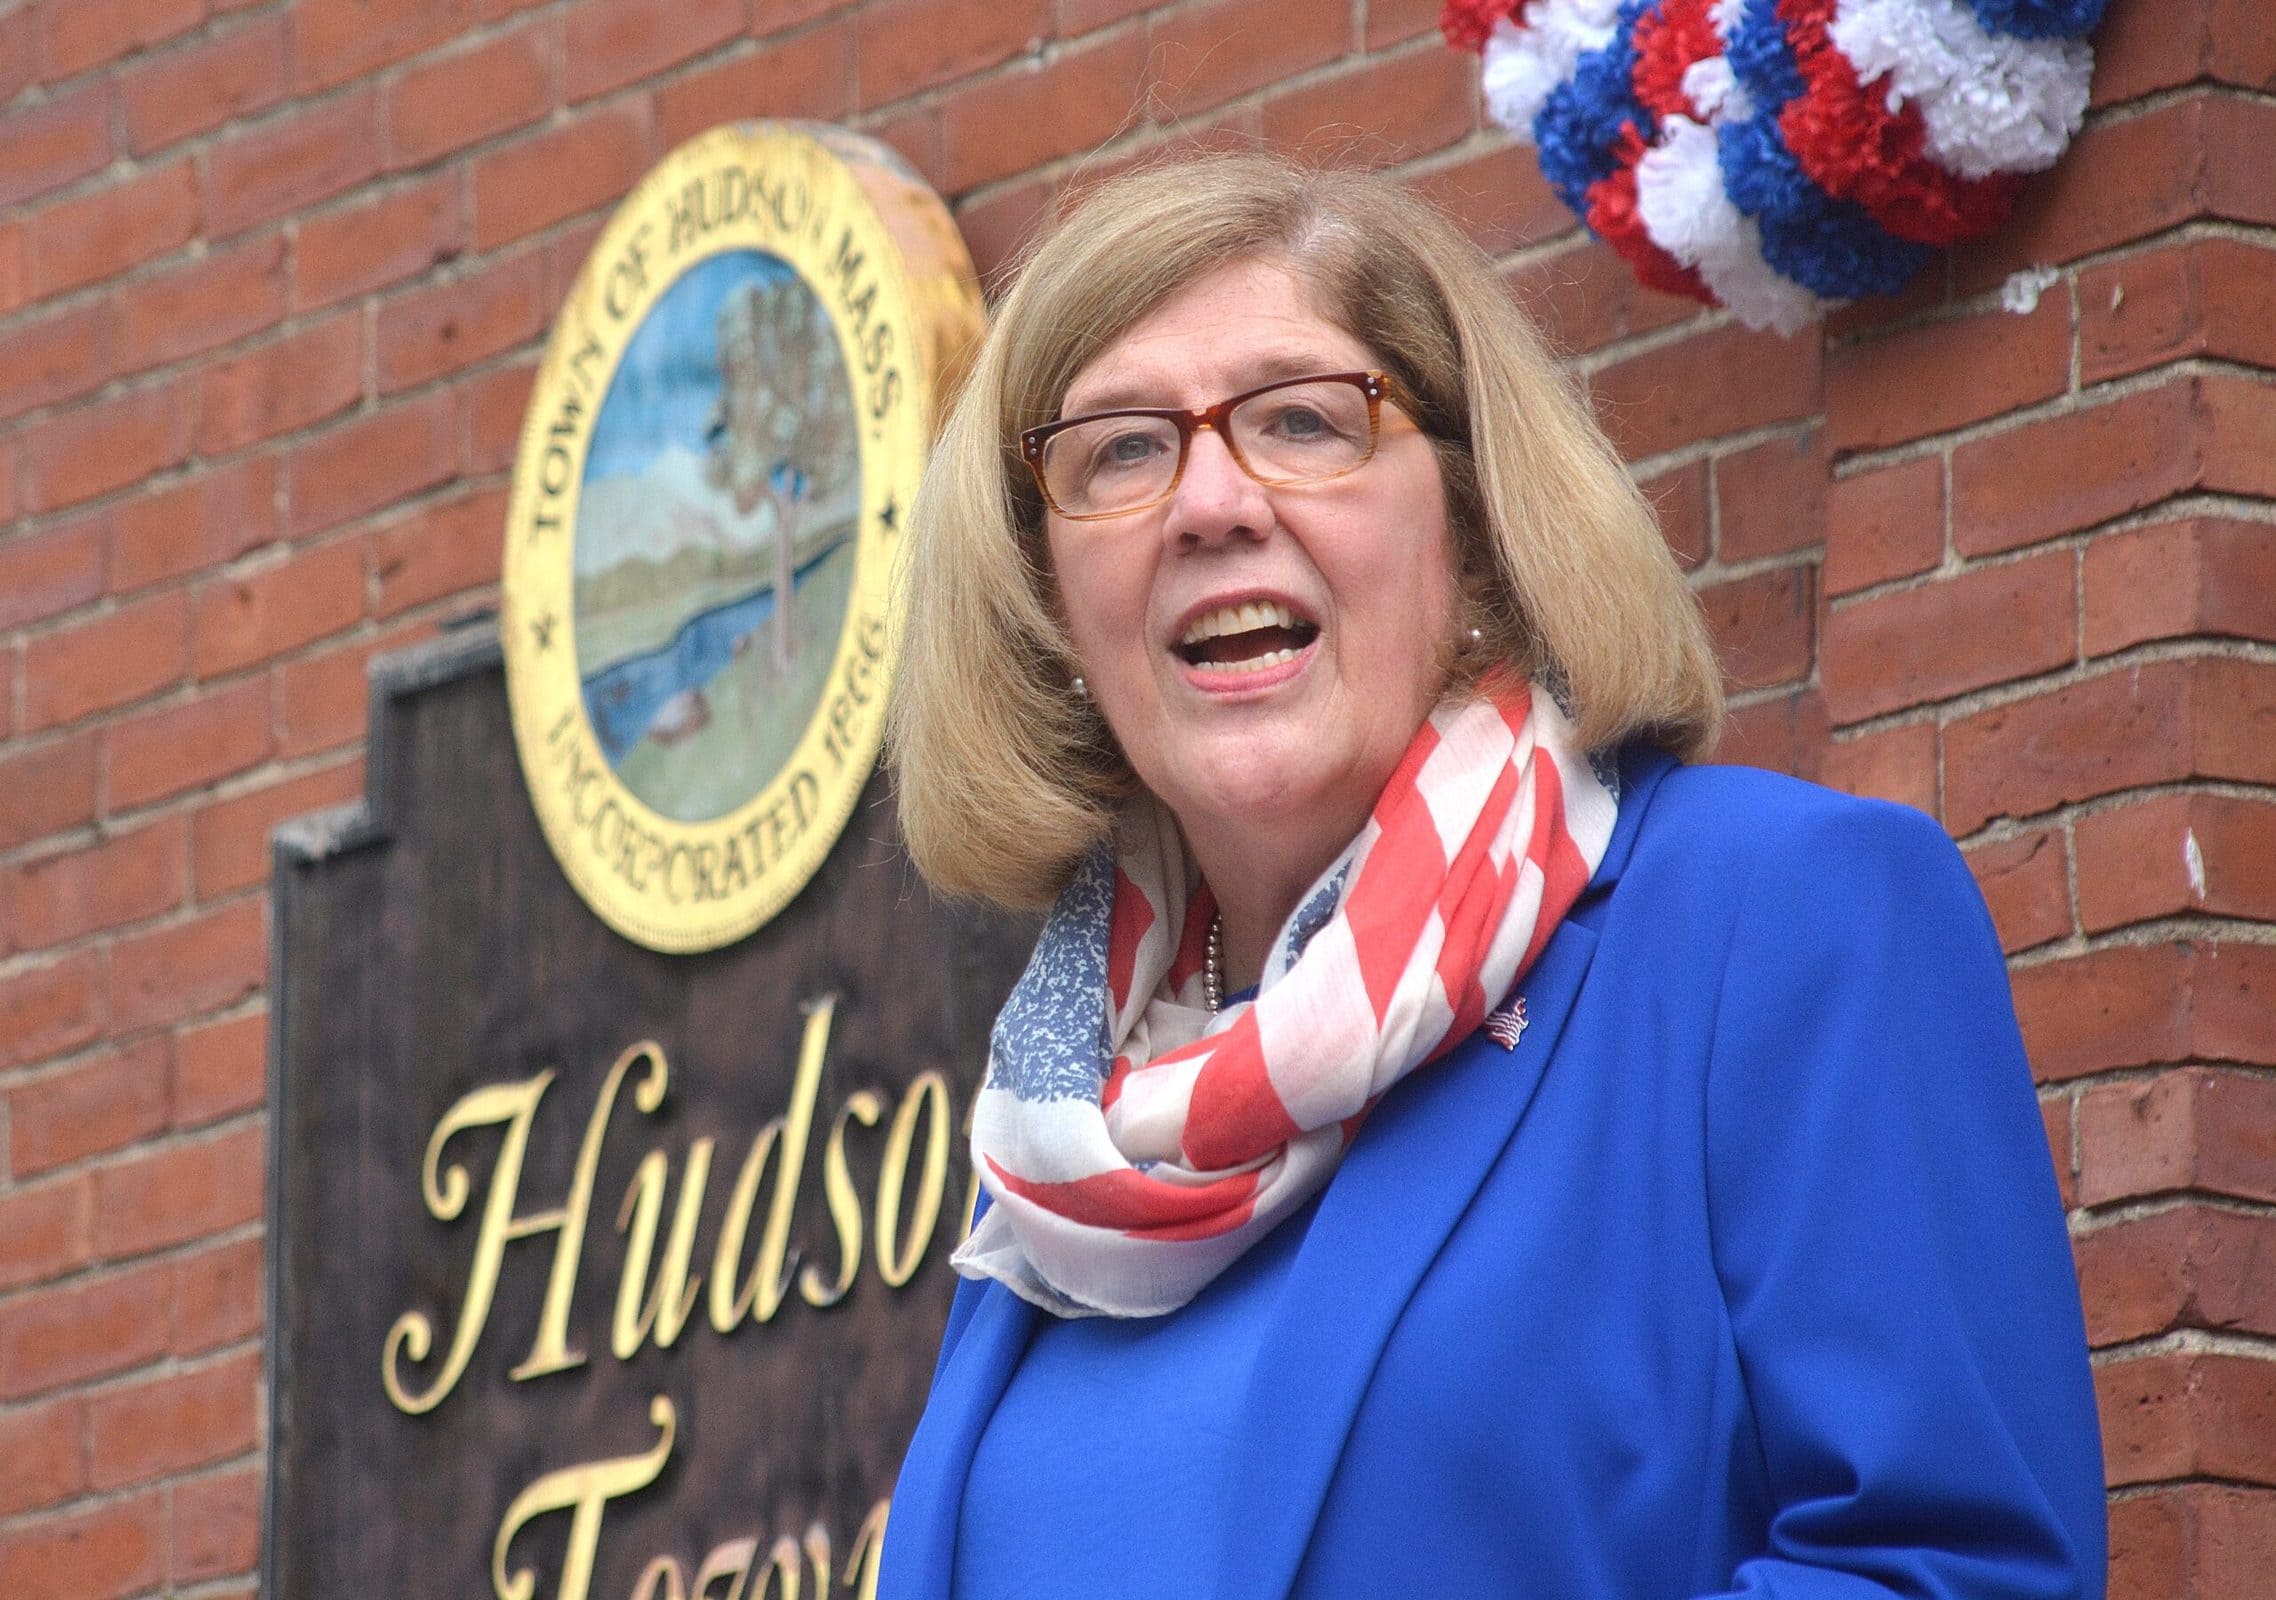 Hudson remembers fallen veterans with ceremony at Town Hall